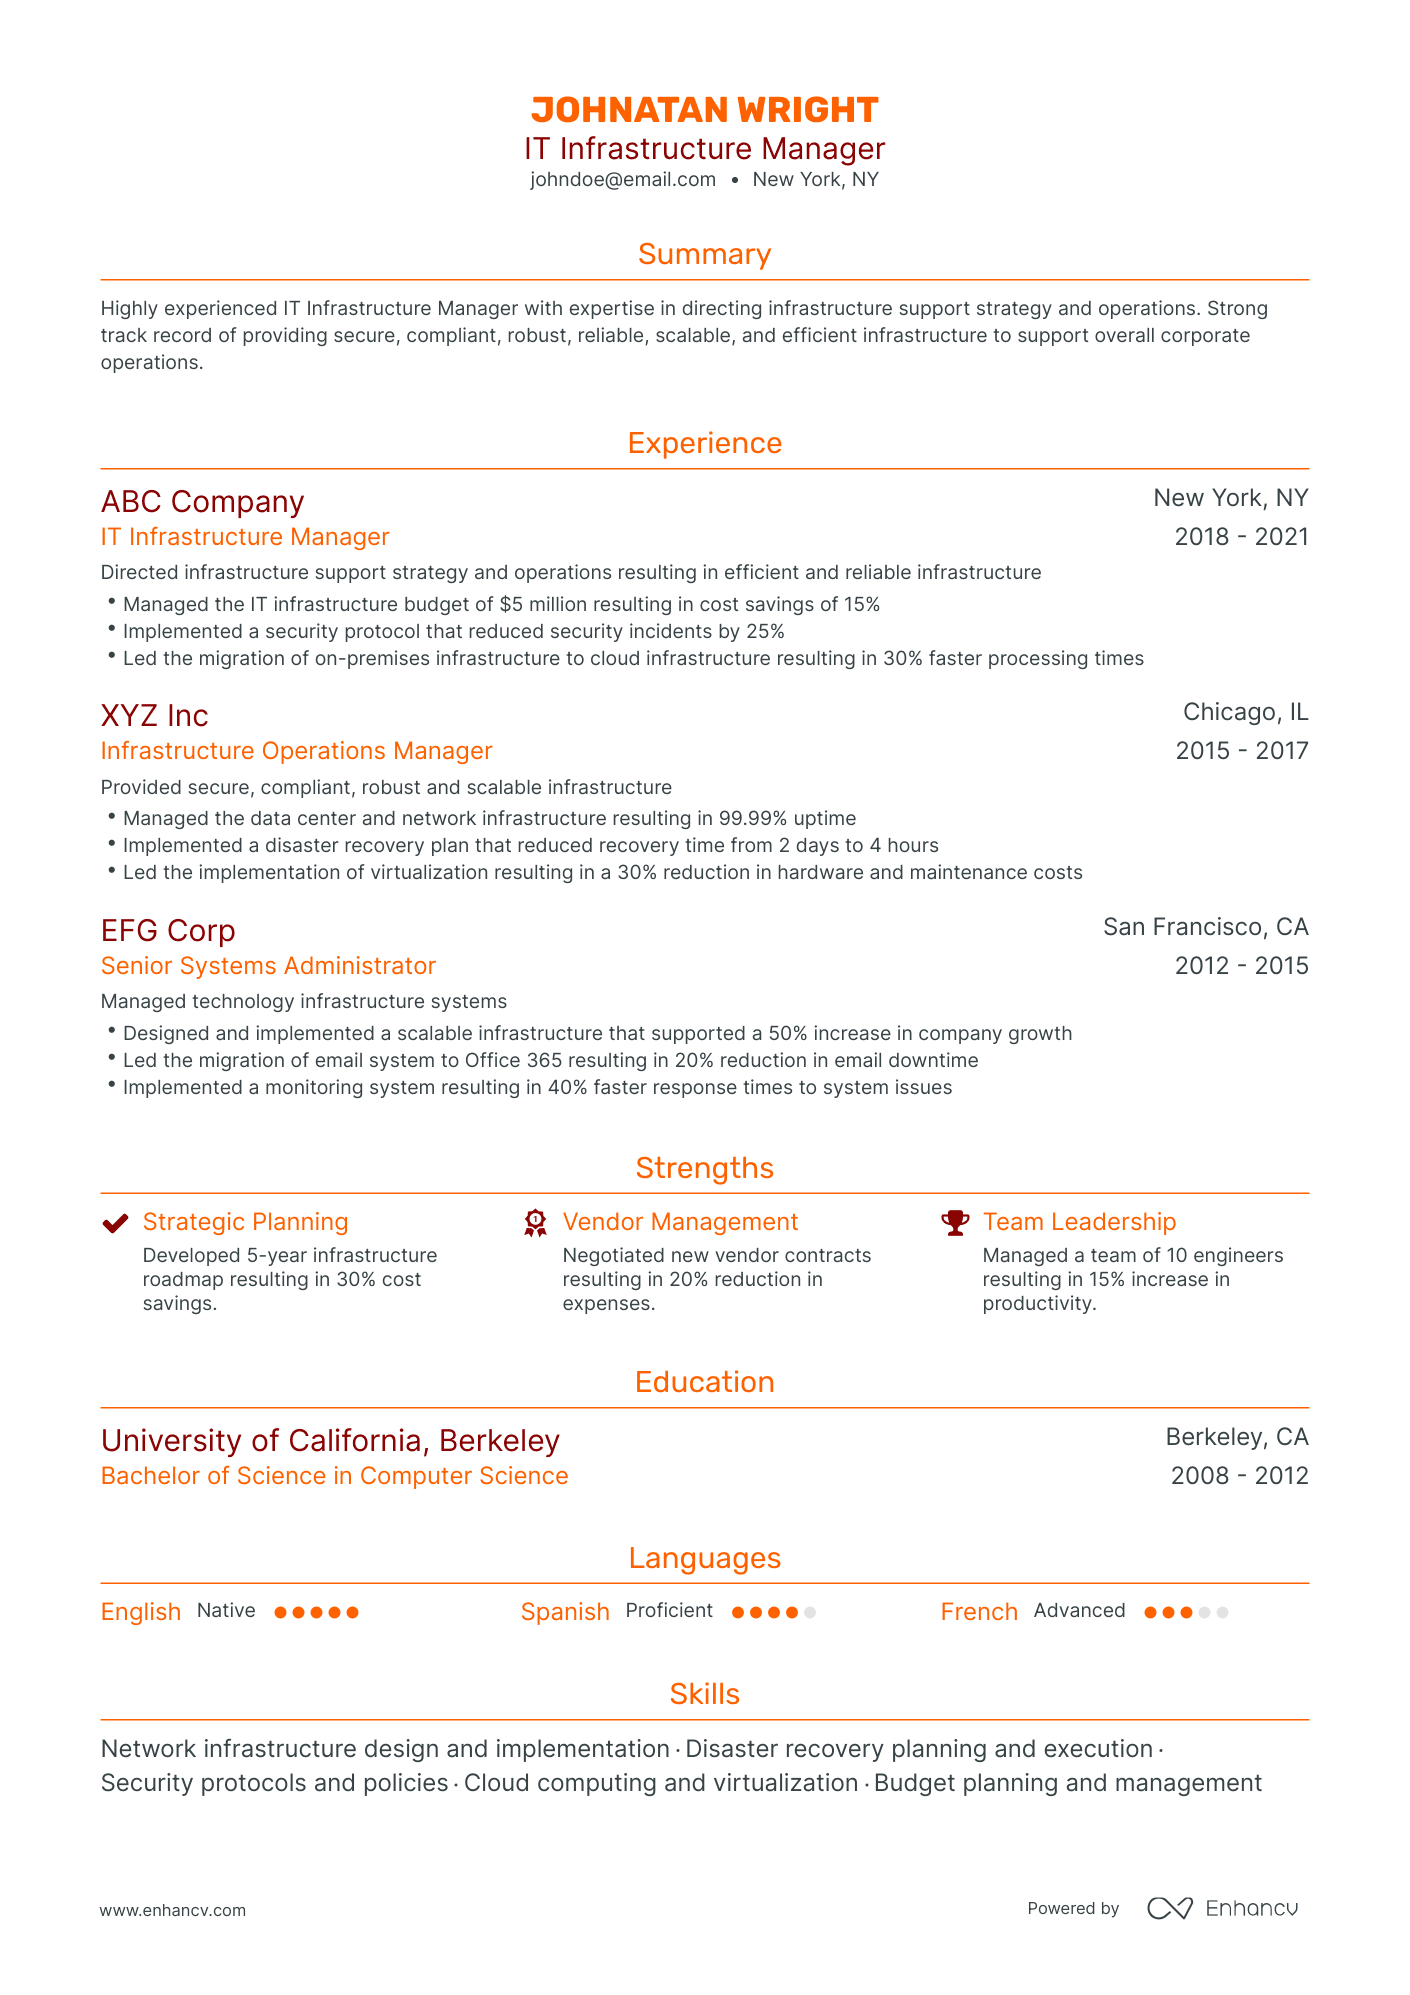 Traditional IT Infrastructure Manager Resume Template